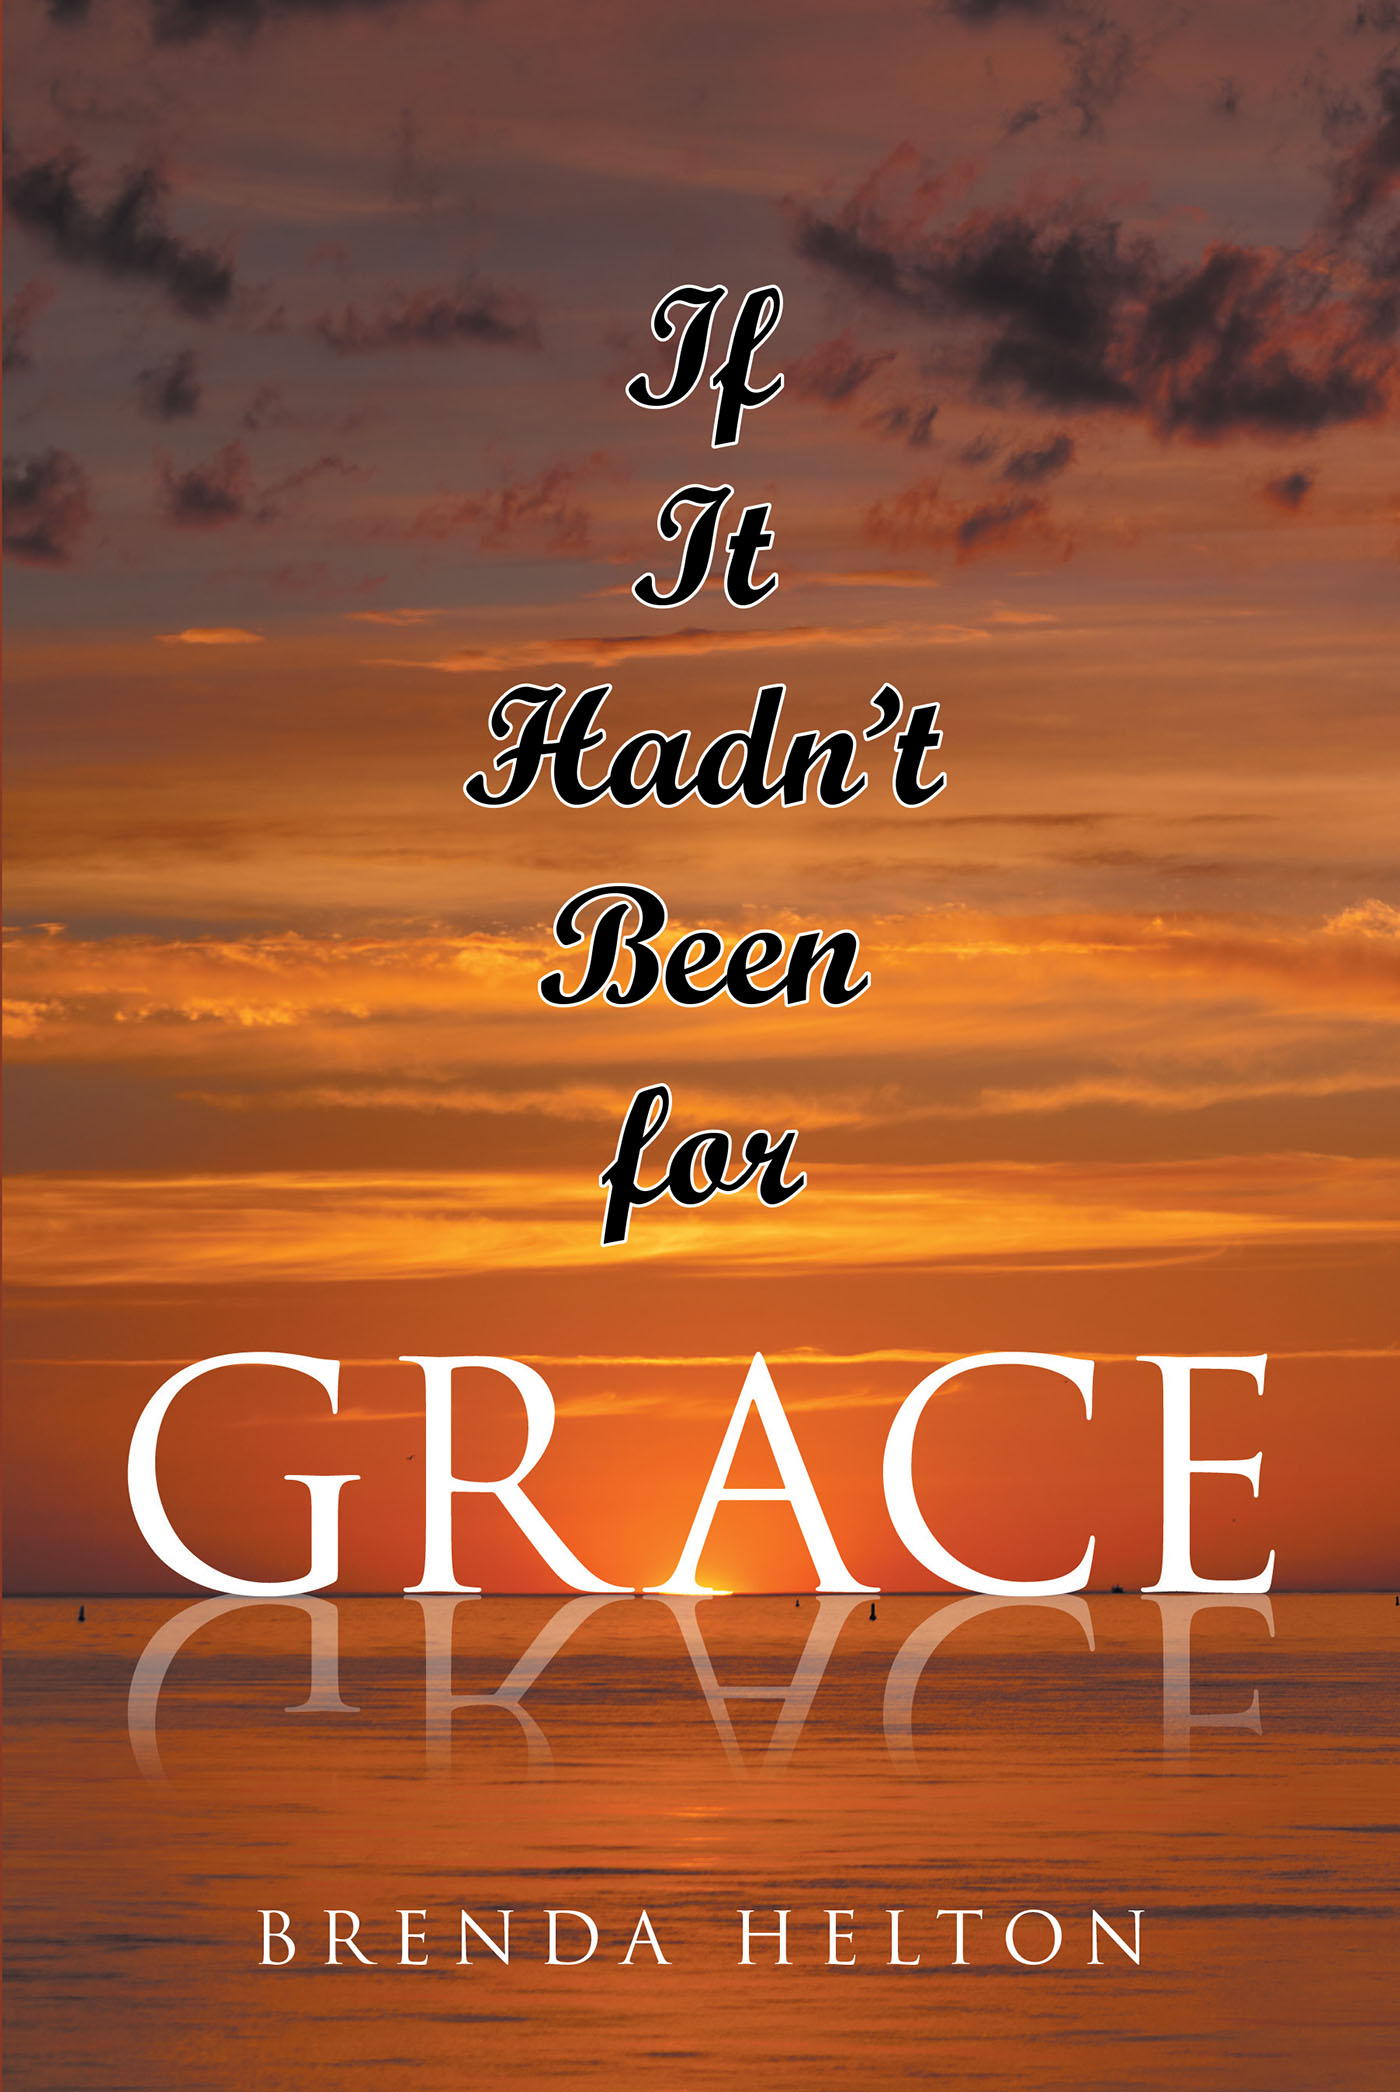 Brenda Helton’s Newly Released “If It Hadn’t Been for Grace” is a Touching Narrative That Presents a Complex Romance and Journey of Faith